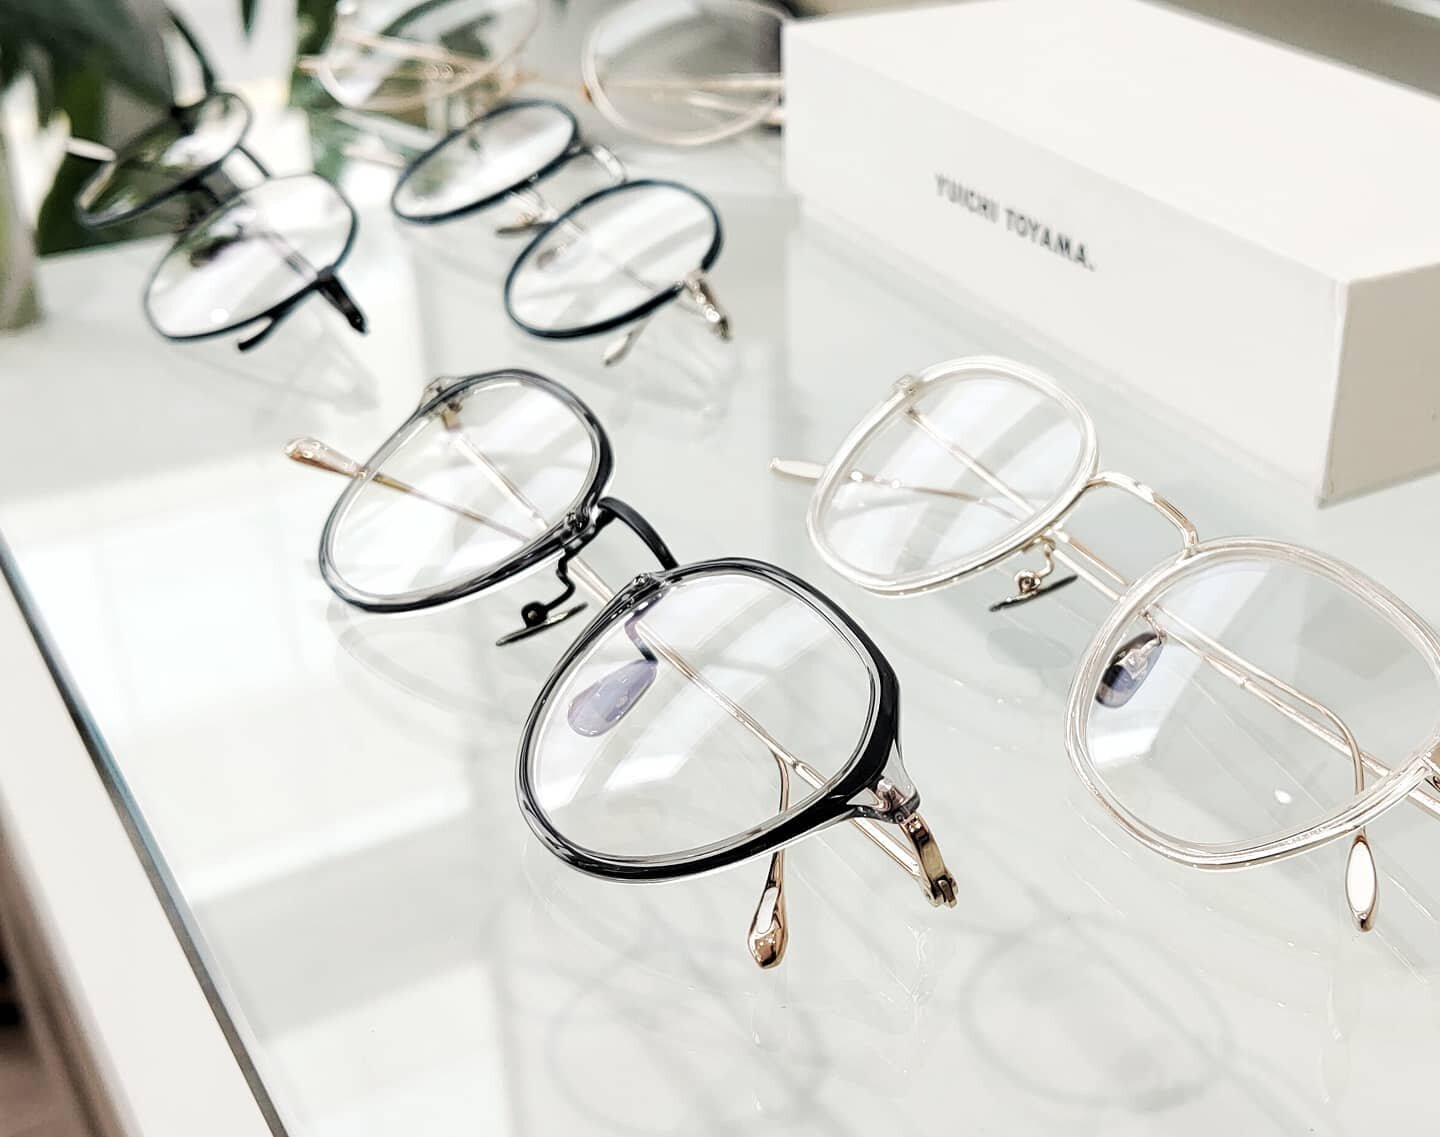 New Yuichi Restock! Come book an appointment and check them out!

#yuzueyewear #yuichitoyama #madeinjapan #handcrafted #handmade #japanglasses #japaneyewear #trend #style #glasses #eyewear #eyeglasses #localbusiness #supportlocalbusiness #markham #ma